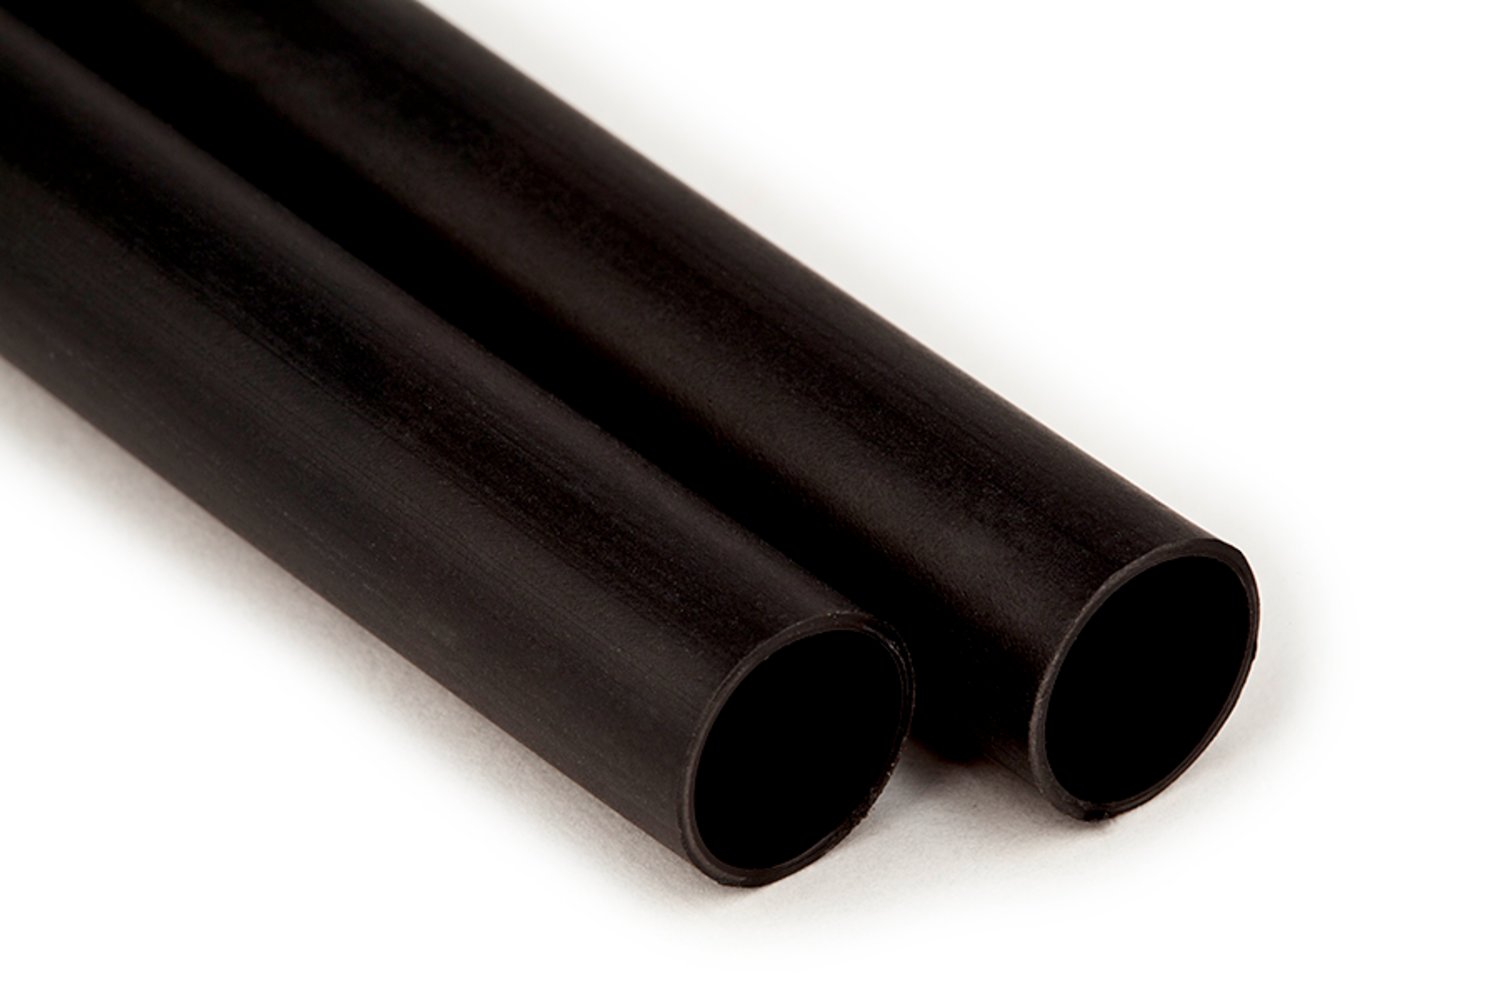 7000148859 - 3M Heat Shrink Multiple-Wall Polyolefin Tubing EPS400-.300-48"-Black-12
Pcs, 48 in length sticks, 12 pieces/case